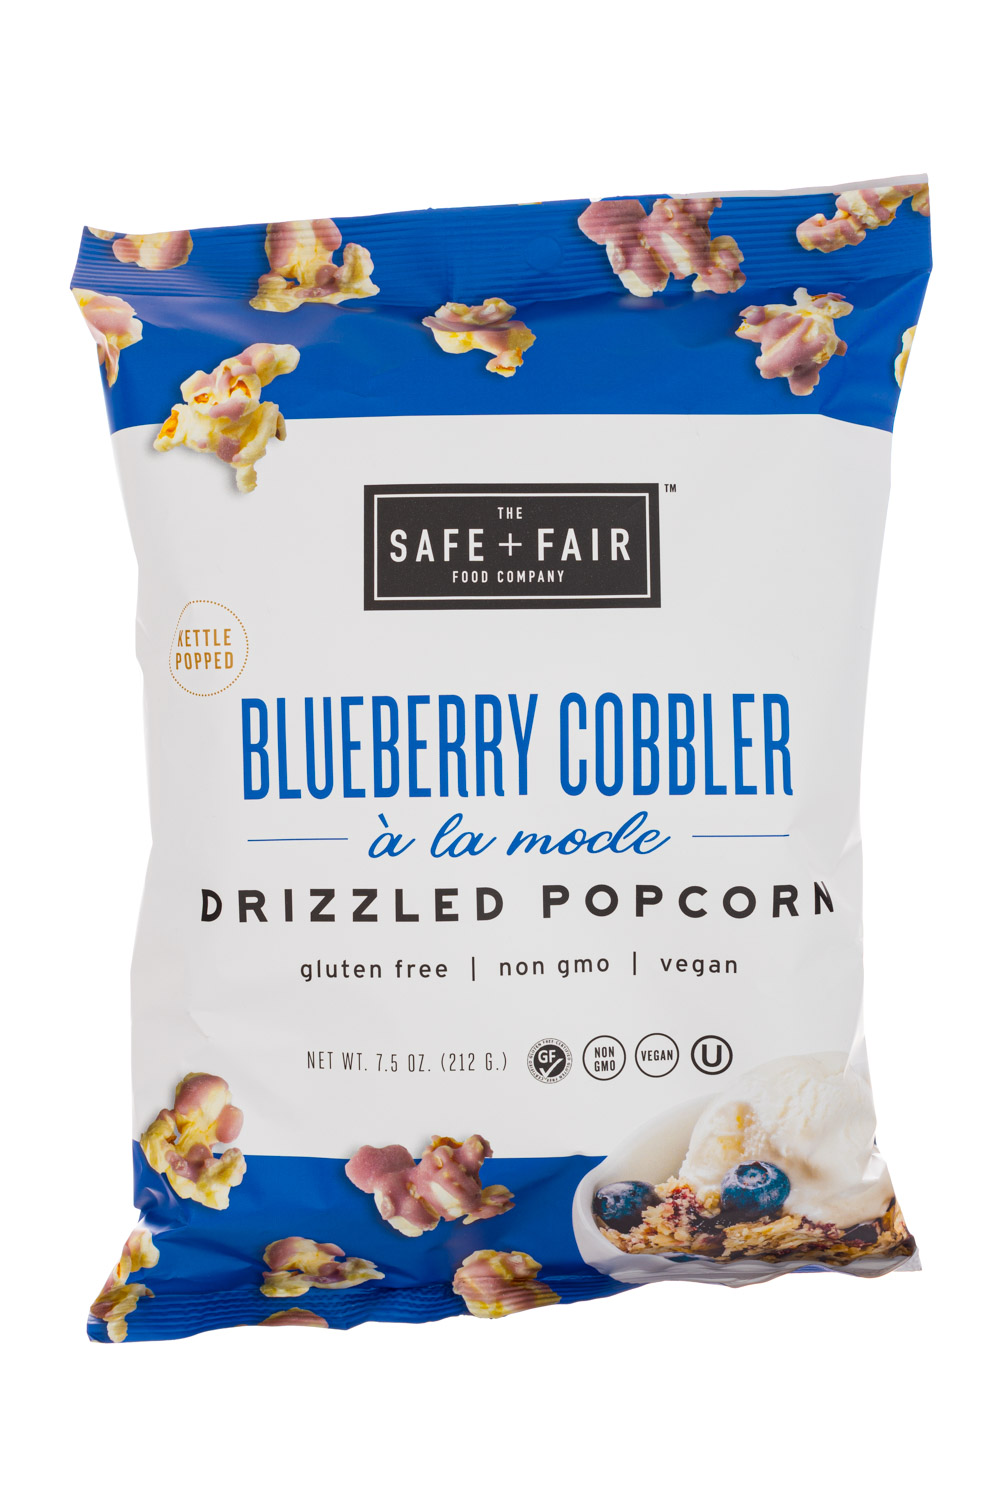 Blueberry Cobbler Drizzled PopCorn 2020